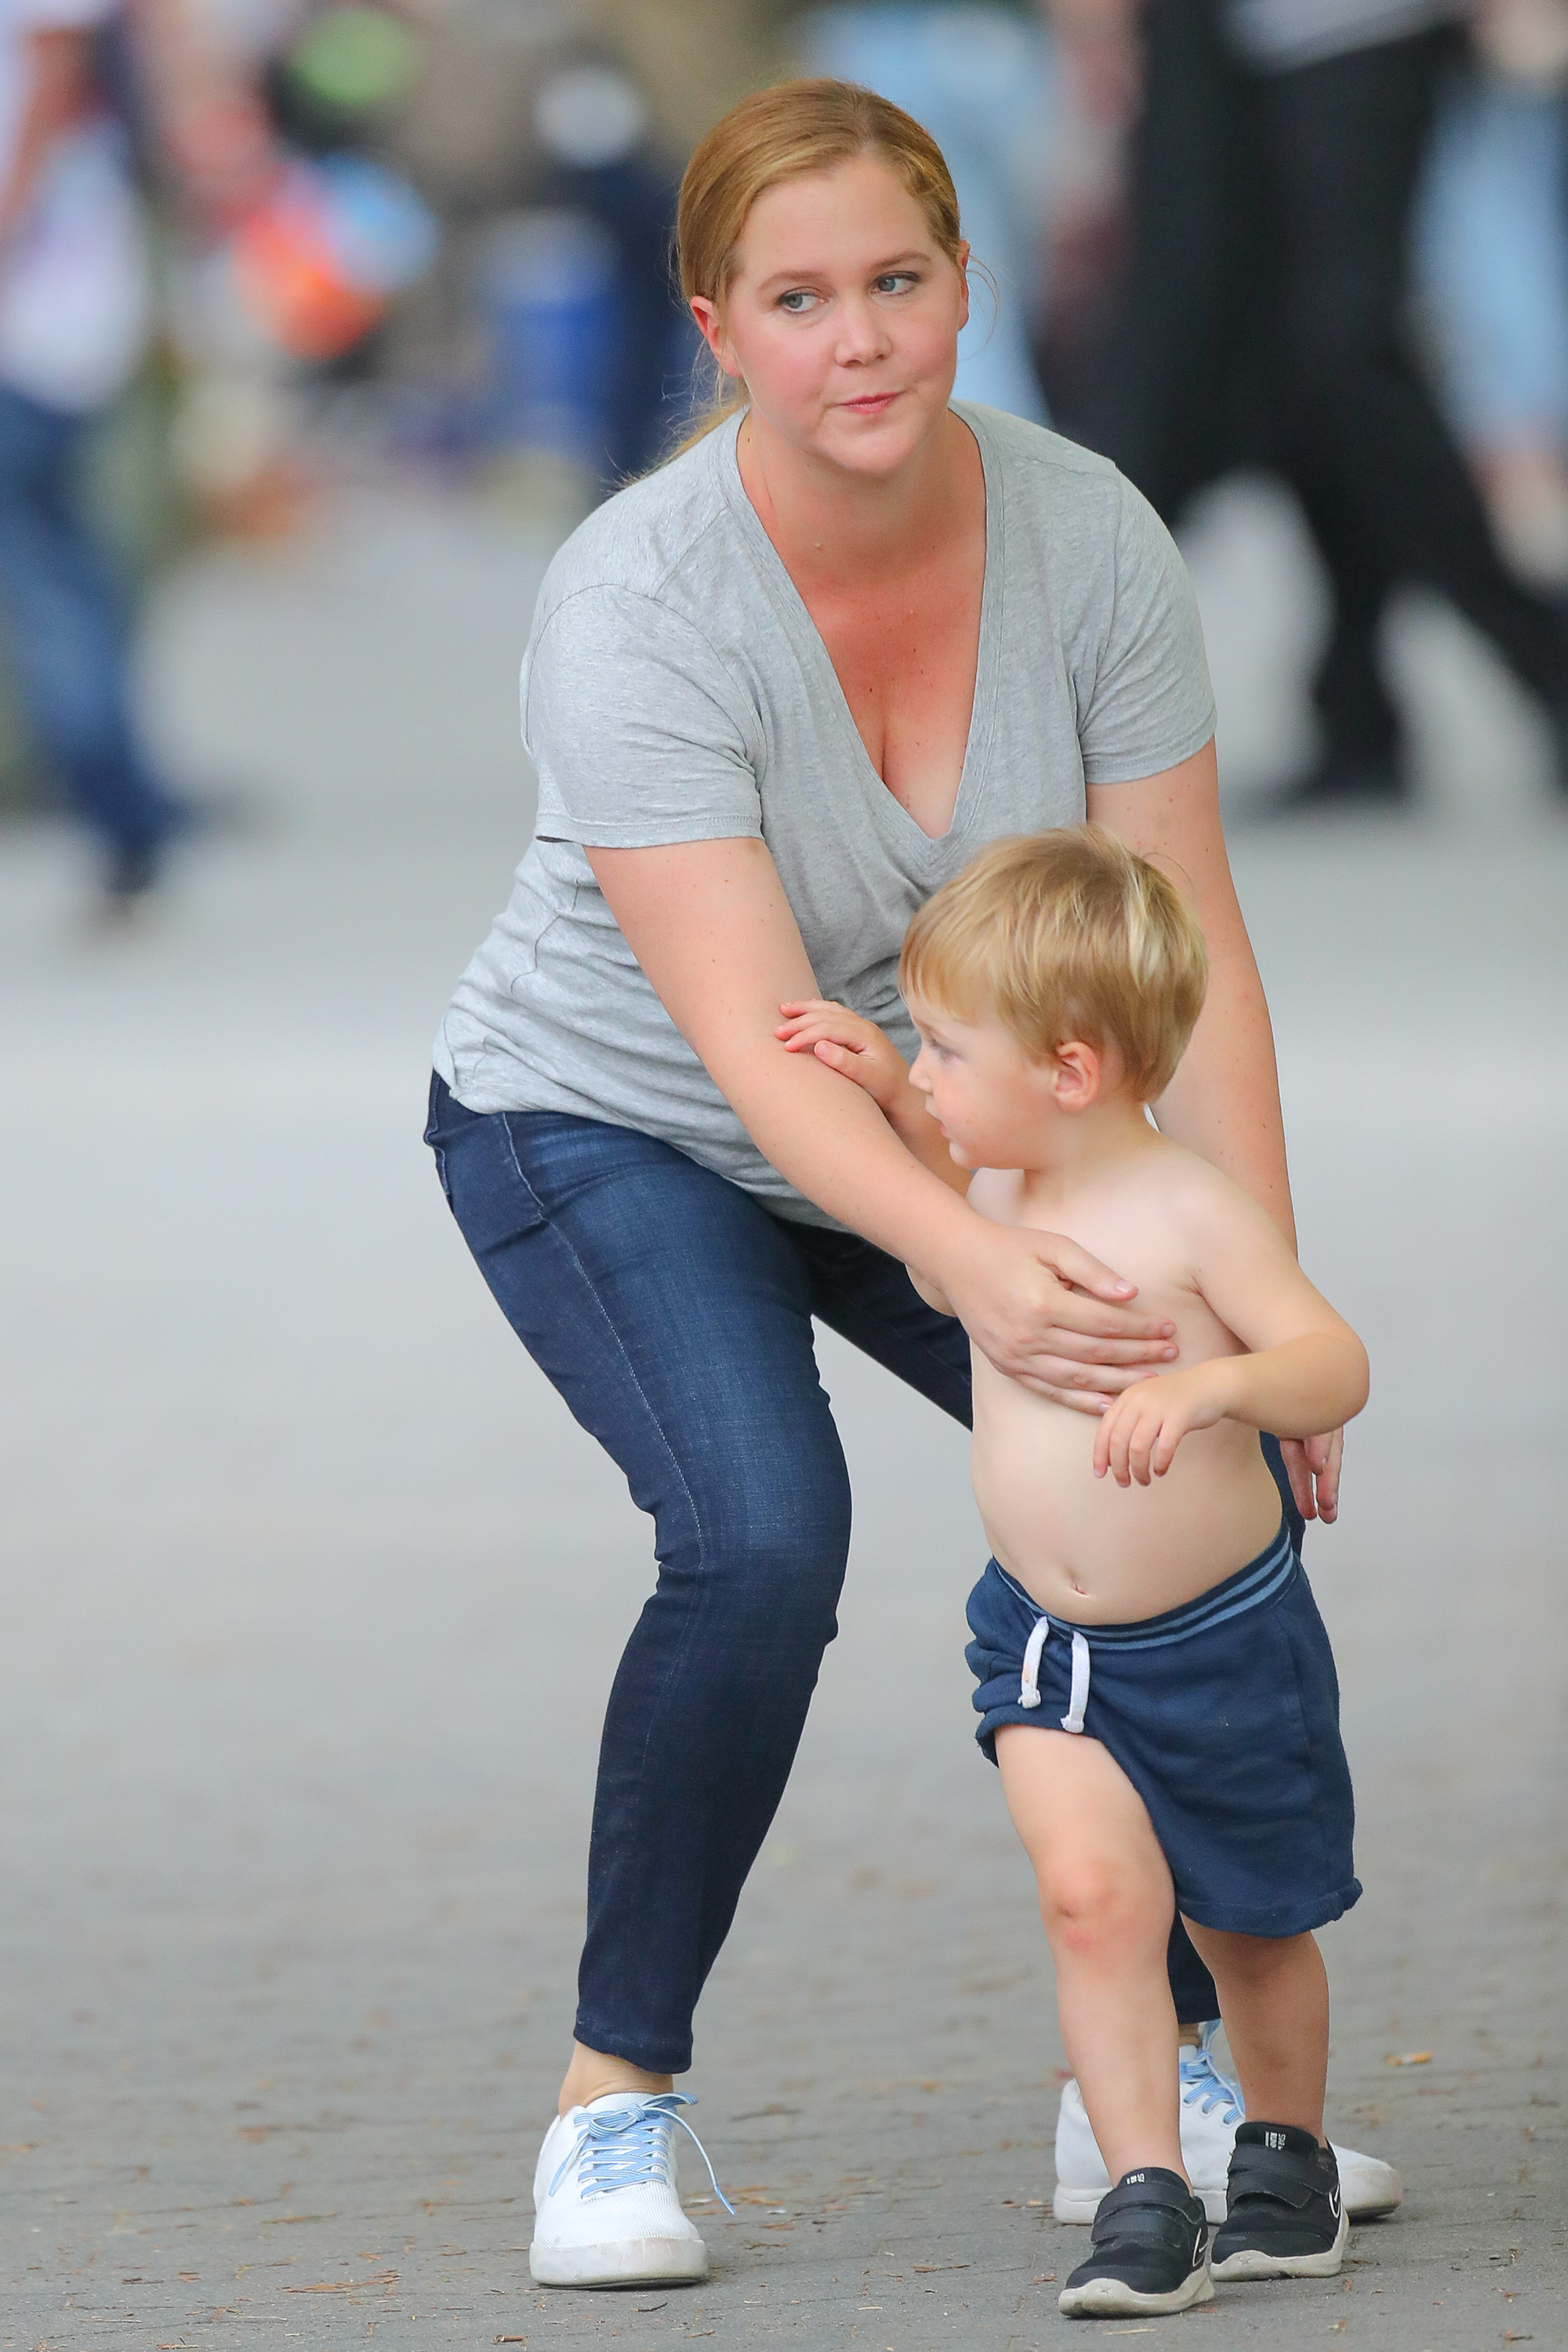 Amy Schumer and her son, Gene David Fischer, spotted out in New York City on April 28, 2021 | Source: Getty Images